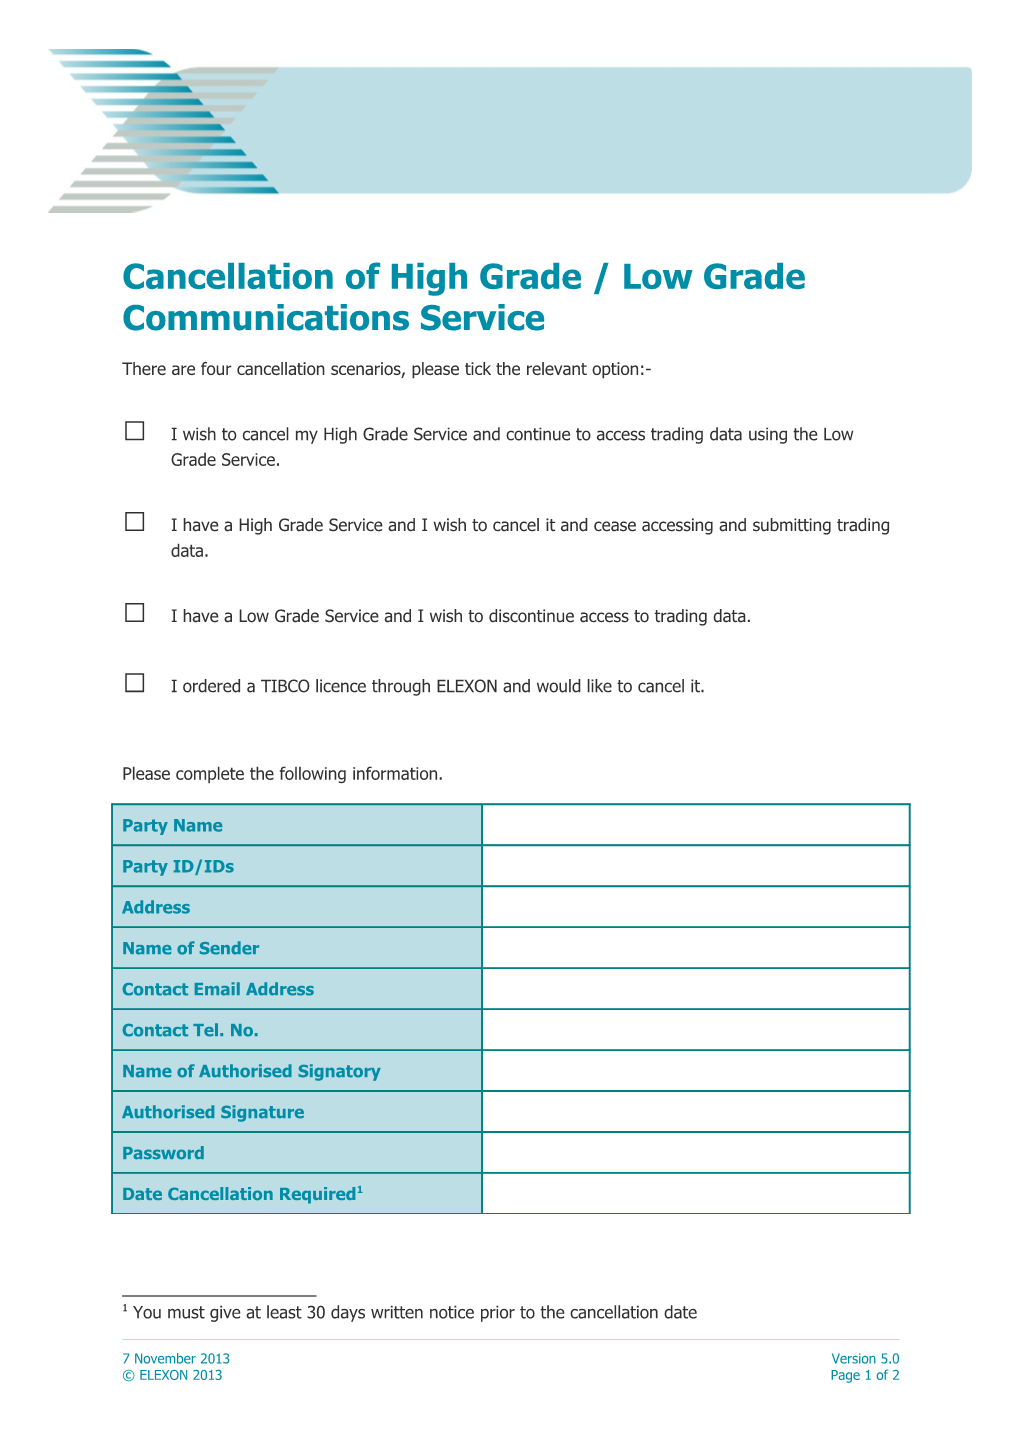 Cancellation of High Grade, Low Grade Communications Service